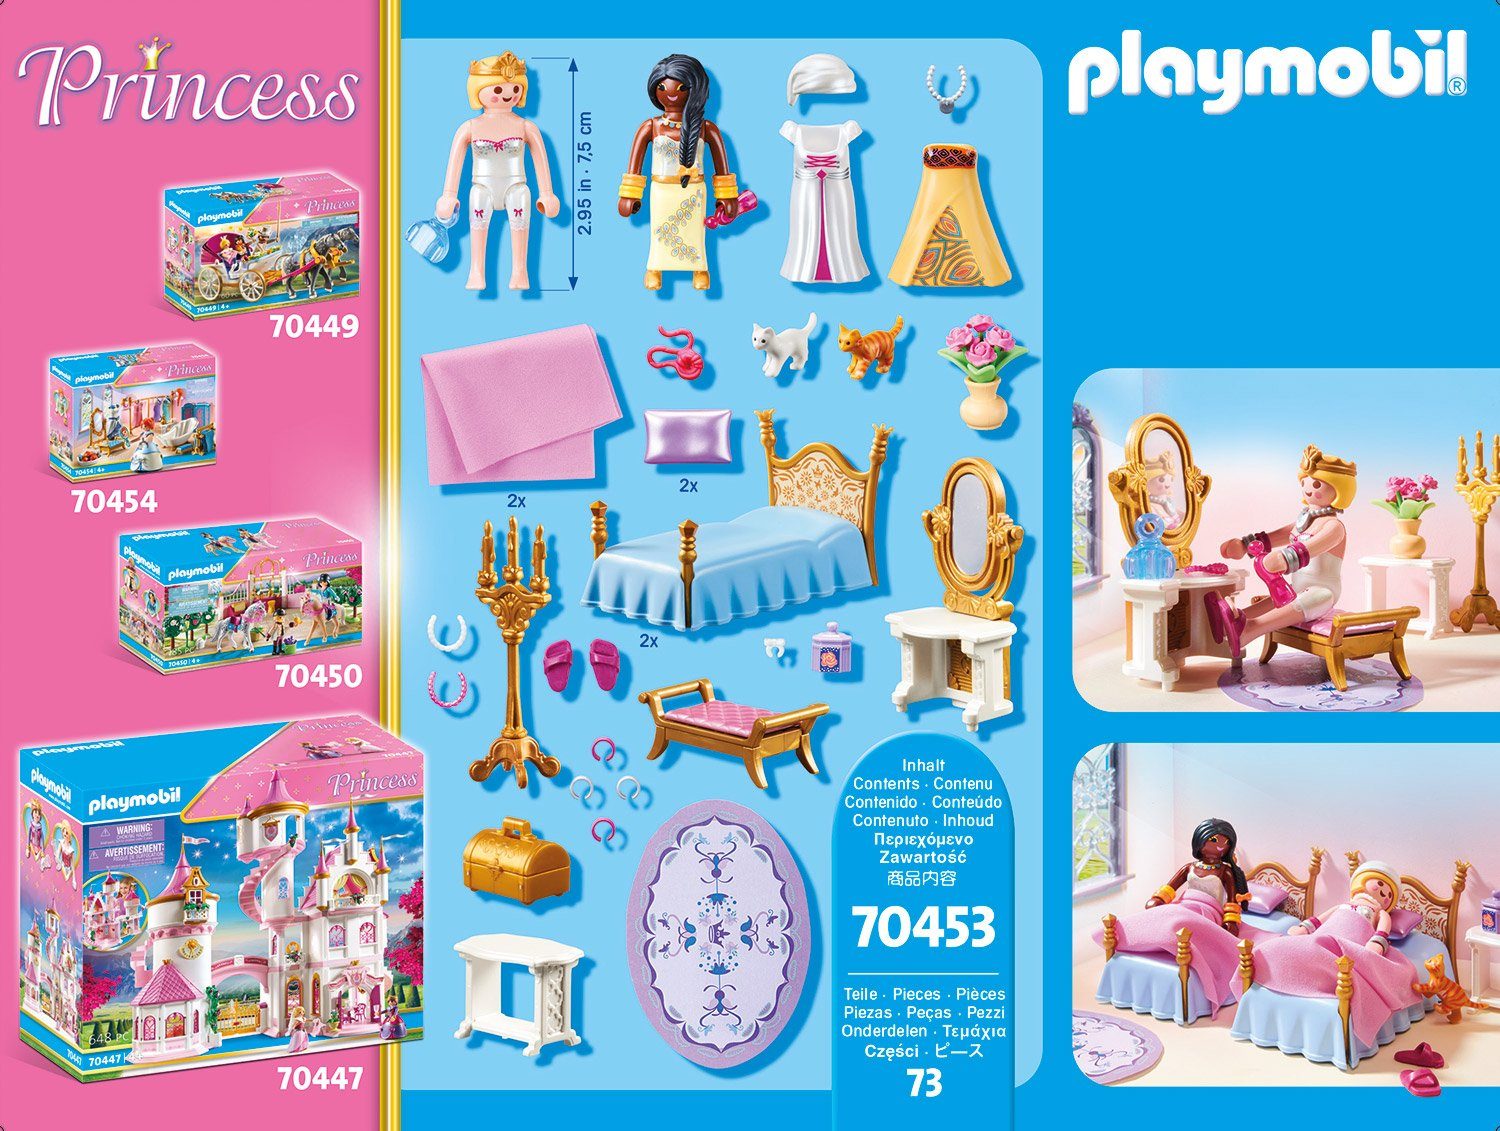 Konstruktions-Spielset Made St), (70453), Playmobil® Germany in Schlafsaal (73 Princess,